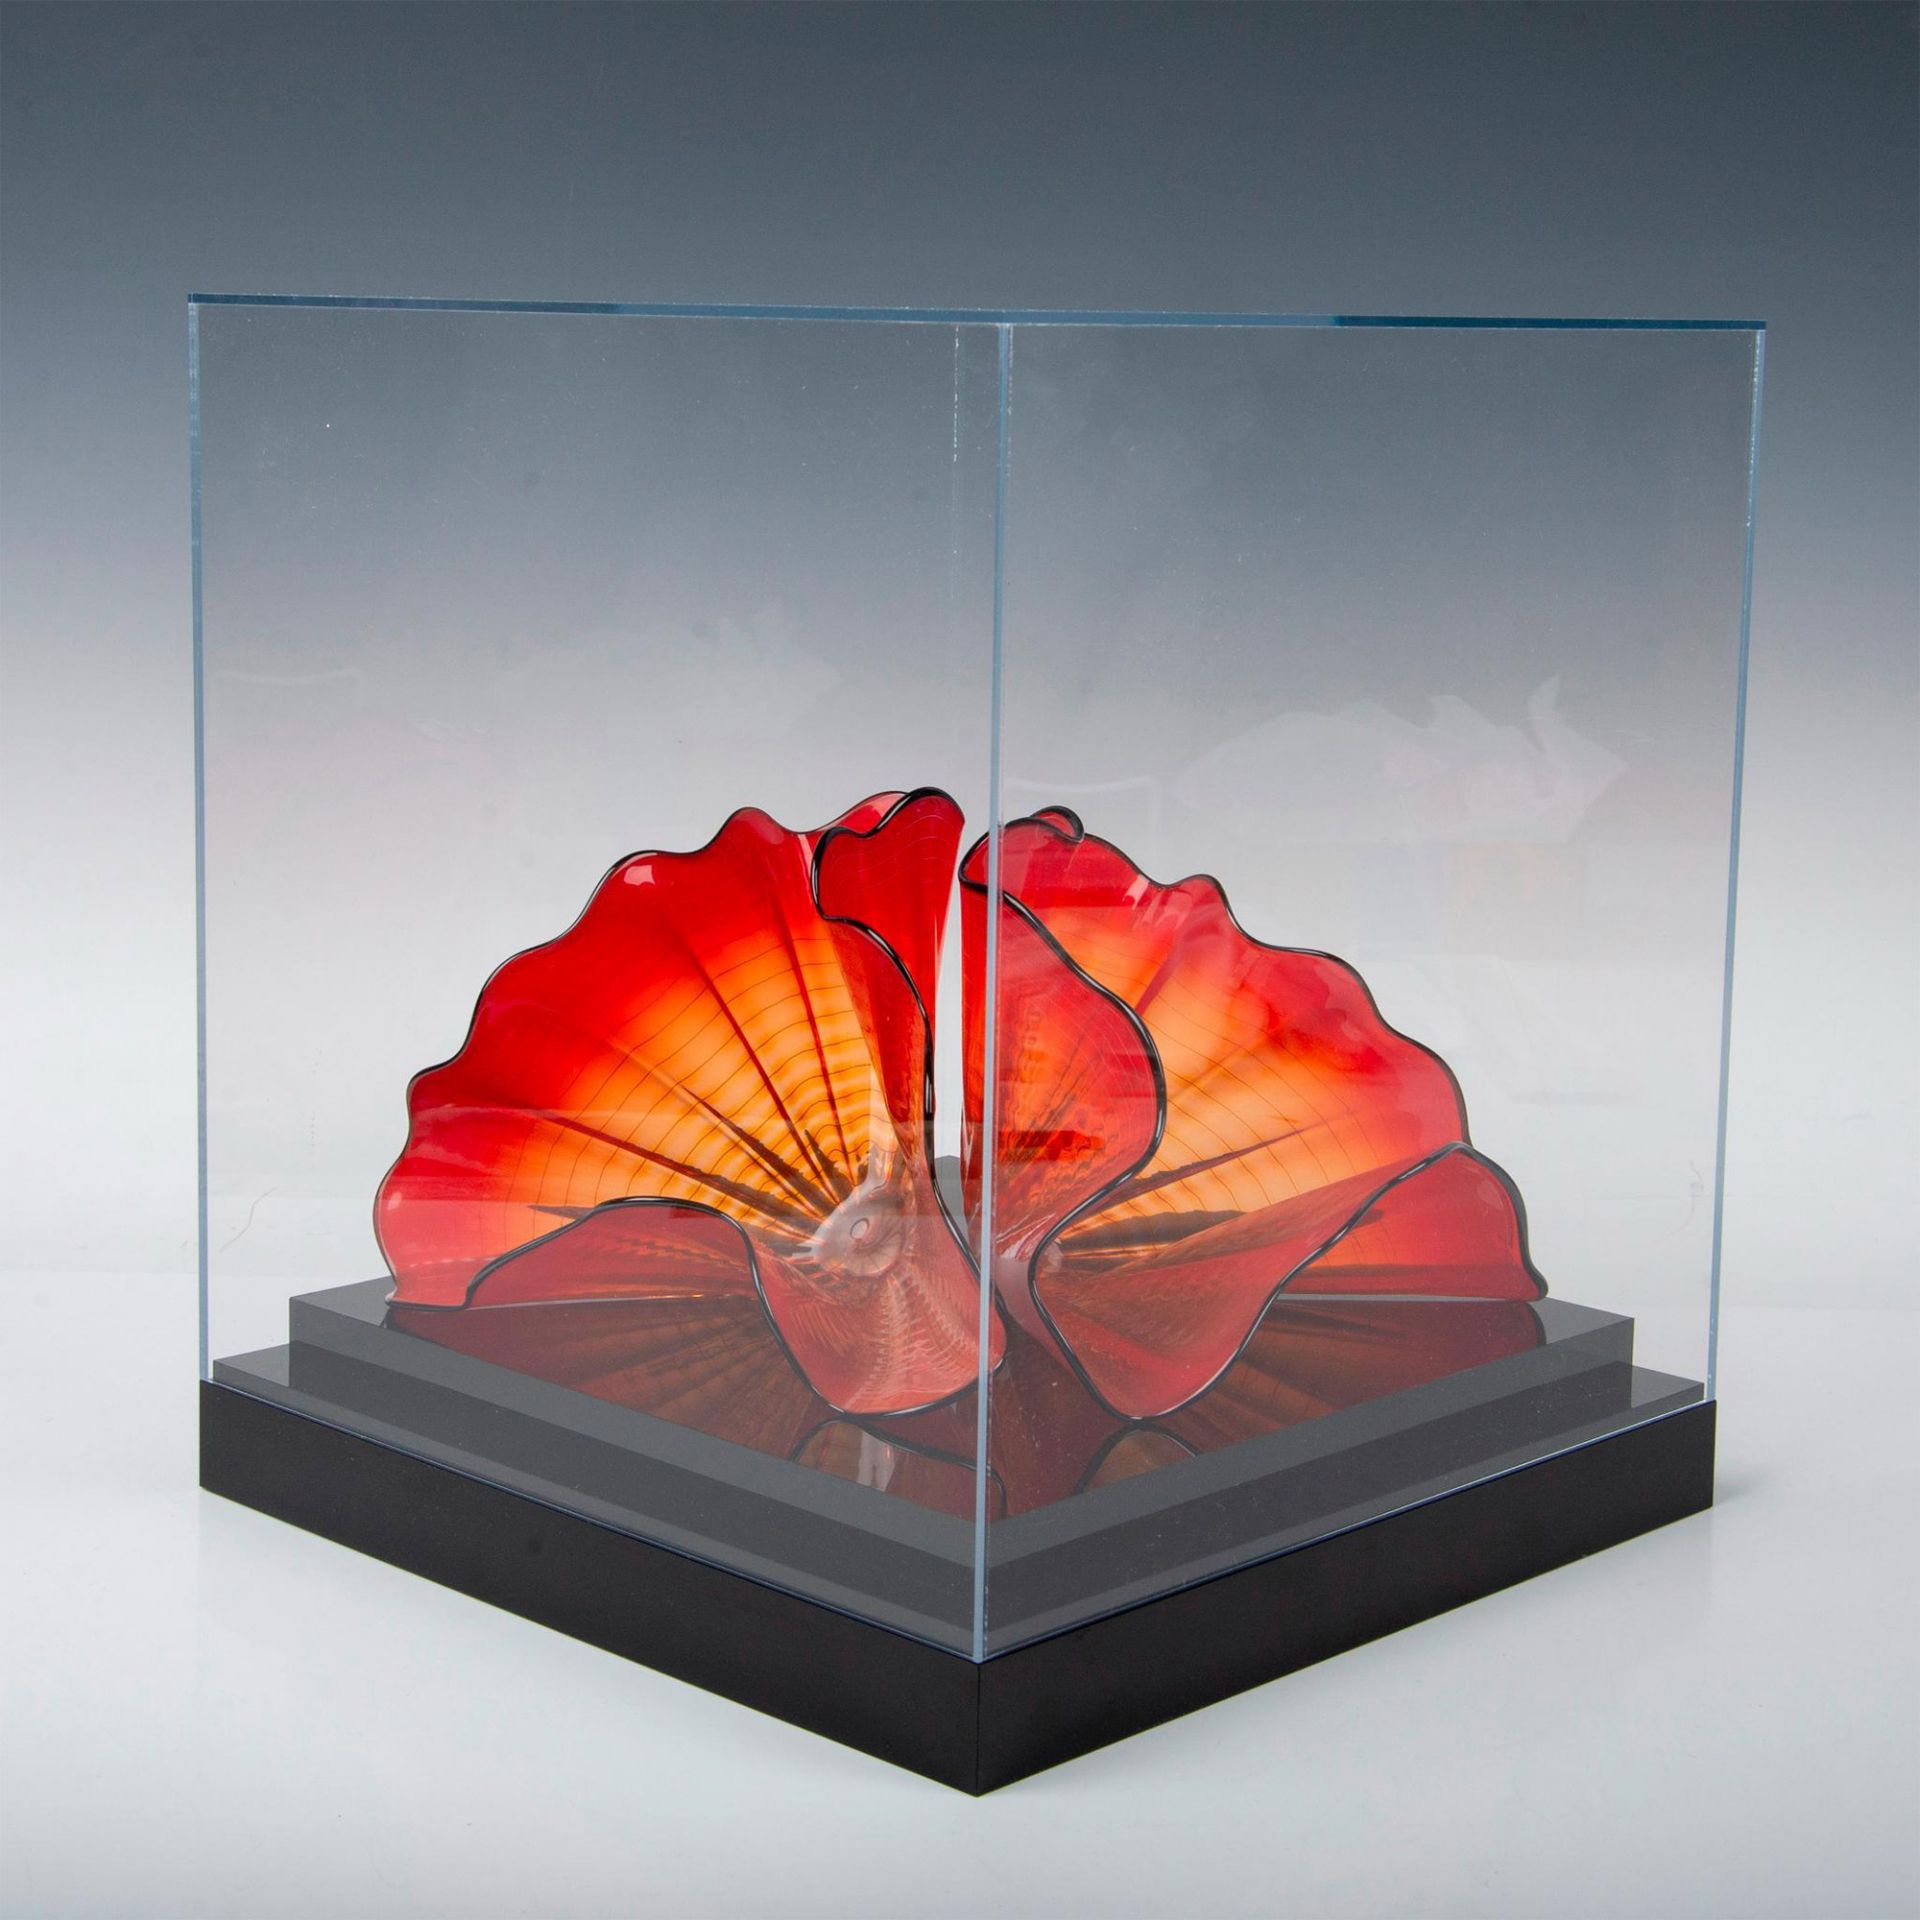 Dale Chihuly Portland Press Art Glass, Red Amber Persian Pair - Image 2 of 20